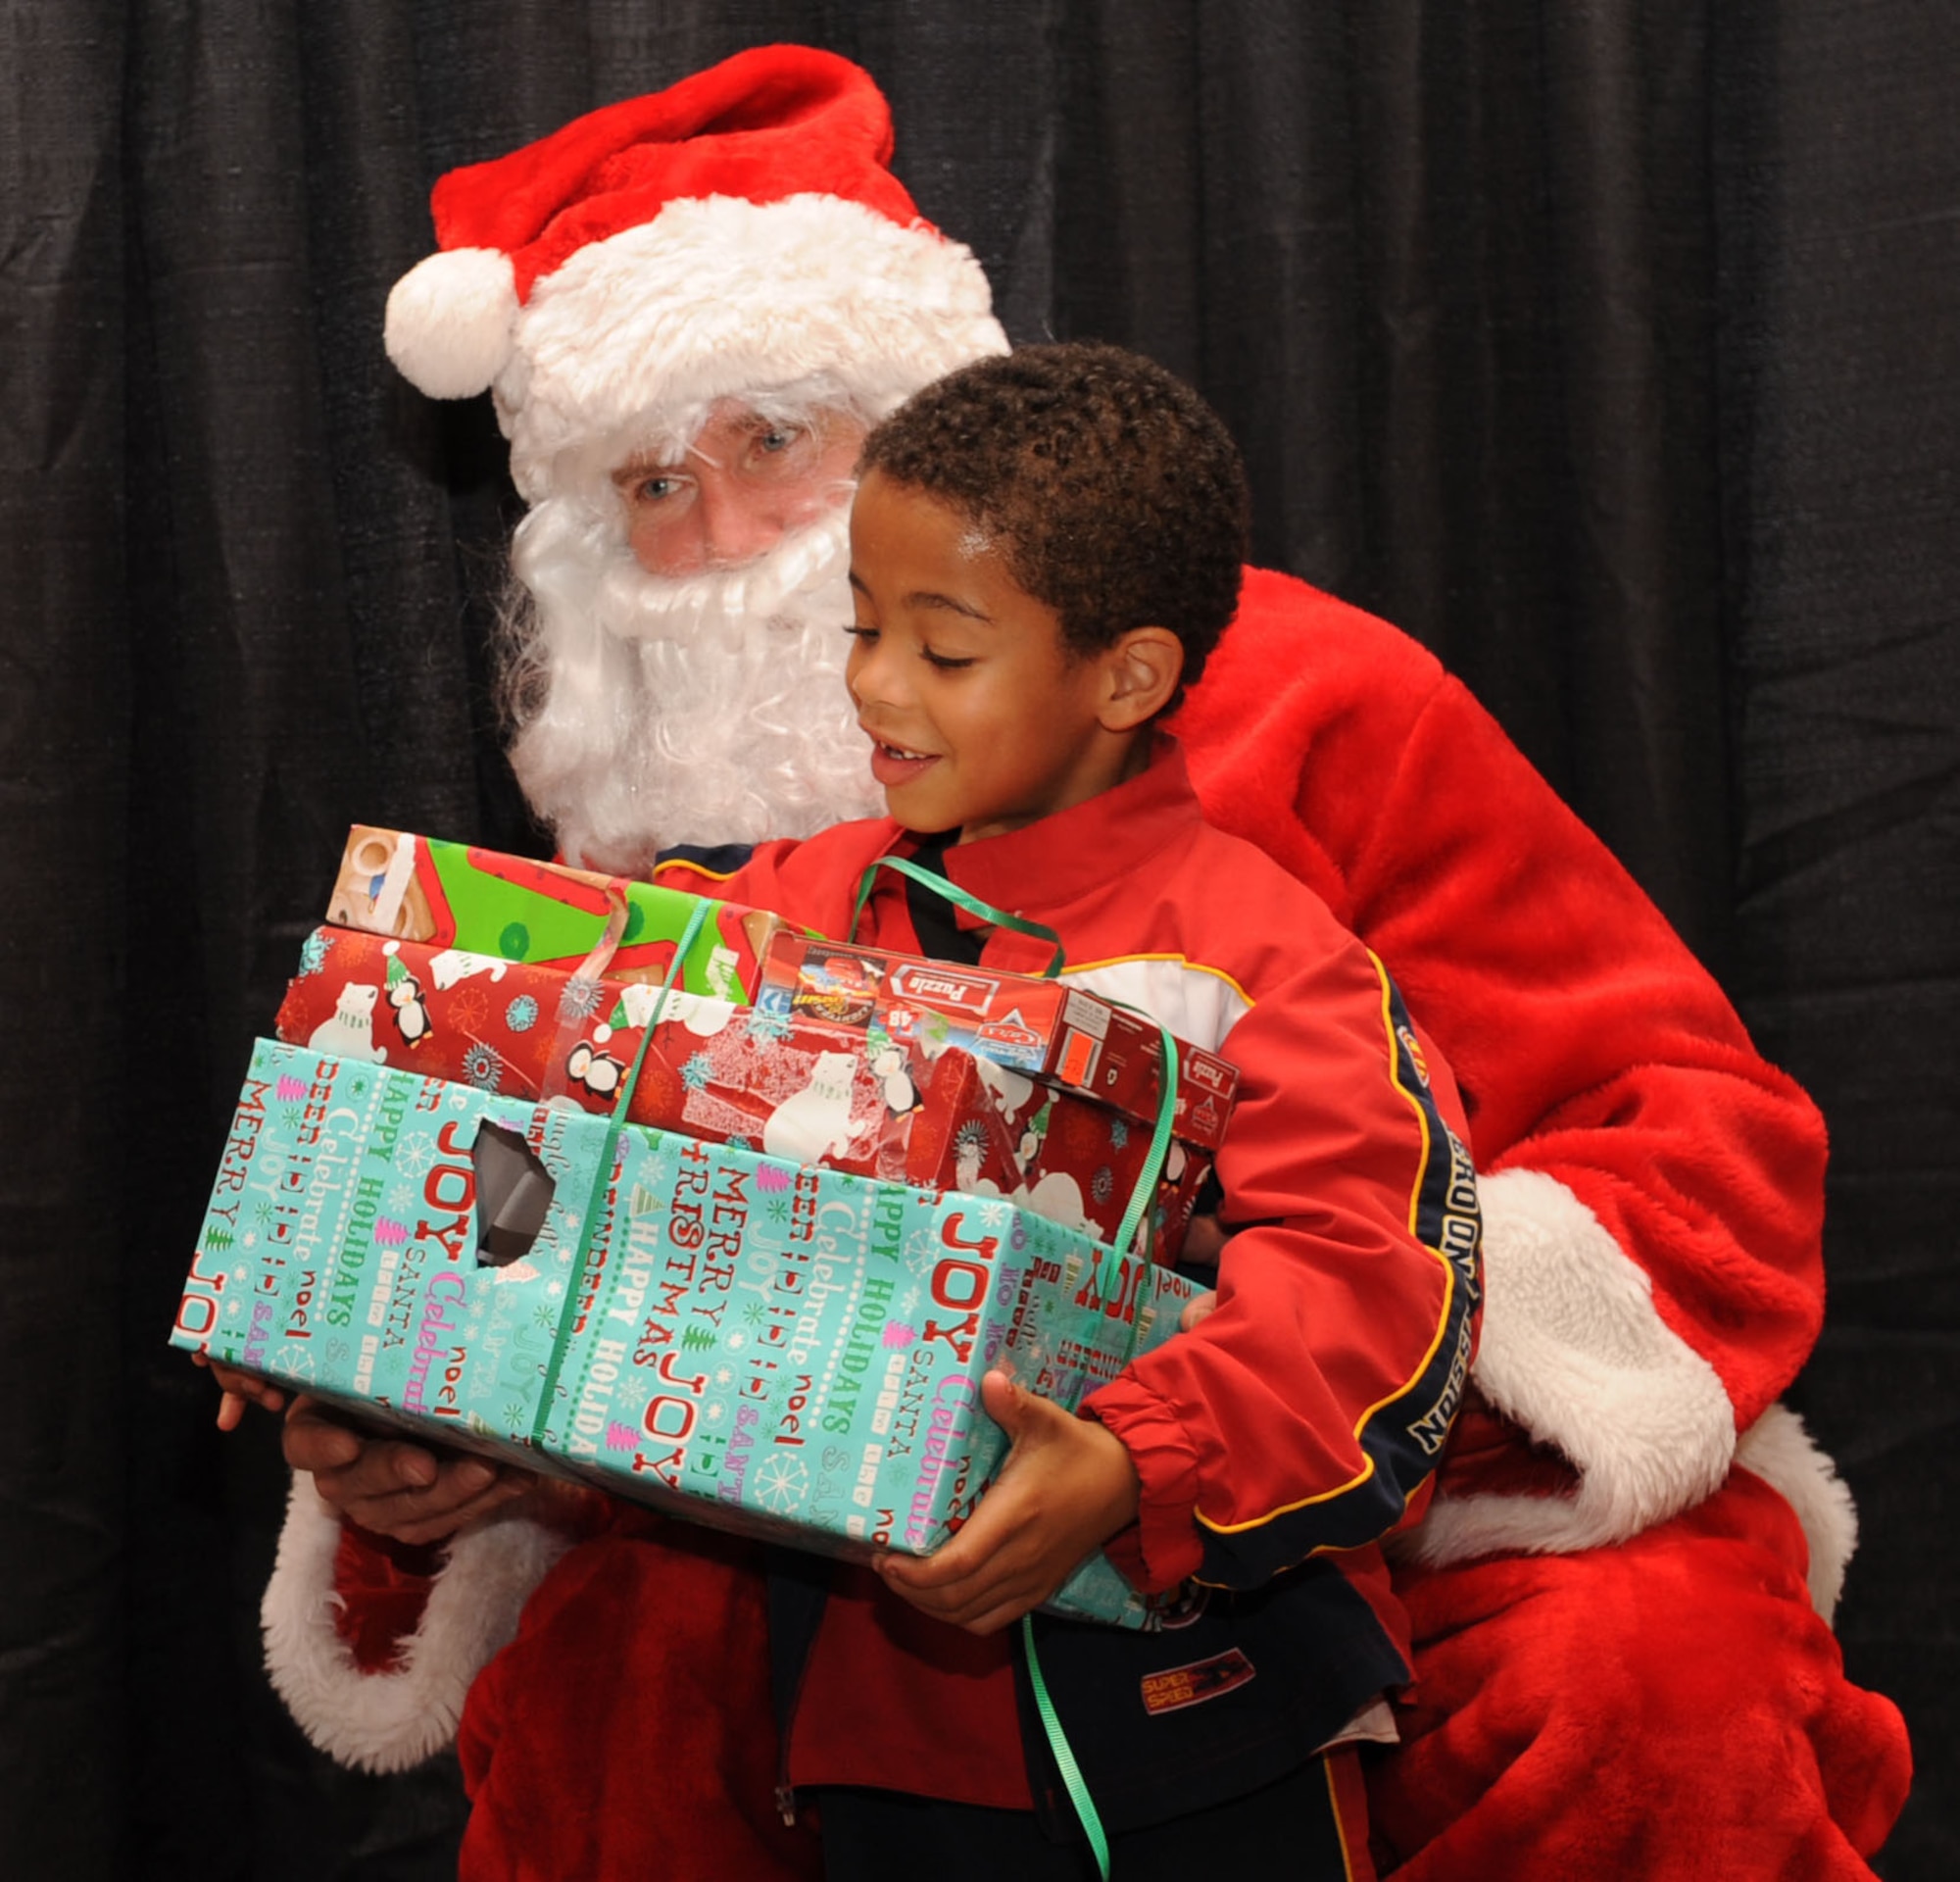 Jacob Thrasher, 6, receives presents from Santa Claus during the Santa's in Blue event at the Bossier City Civic Center in Bossier City, La., Dec. 18. Santa's in Blue is a program sponsored by the Air Force Sergeants Association and Barksdale Top Three to provide gifts for more than 400 children in foster care. (U.S. Air Force photo/Airman 1st Class Sean Martin)(Released)